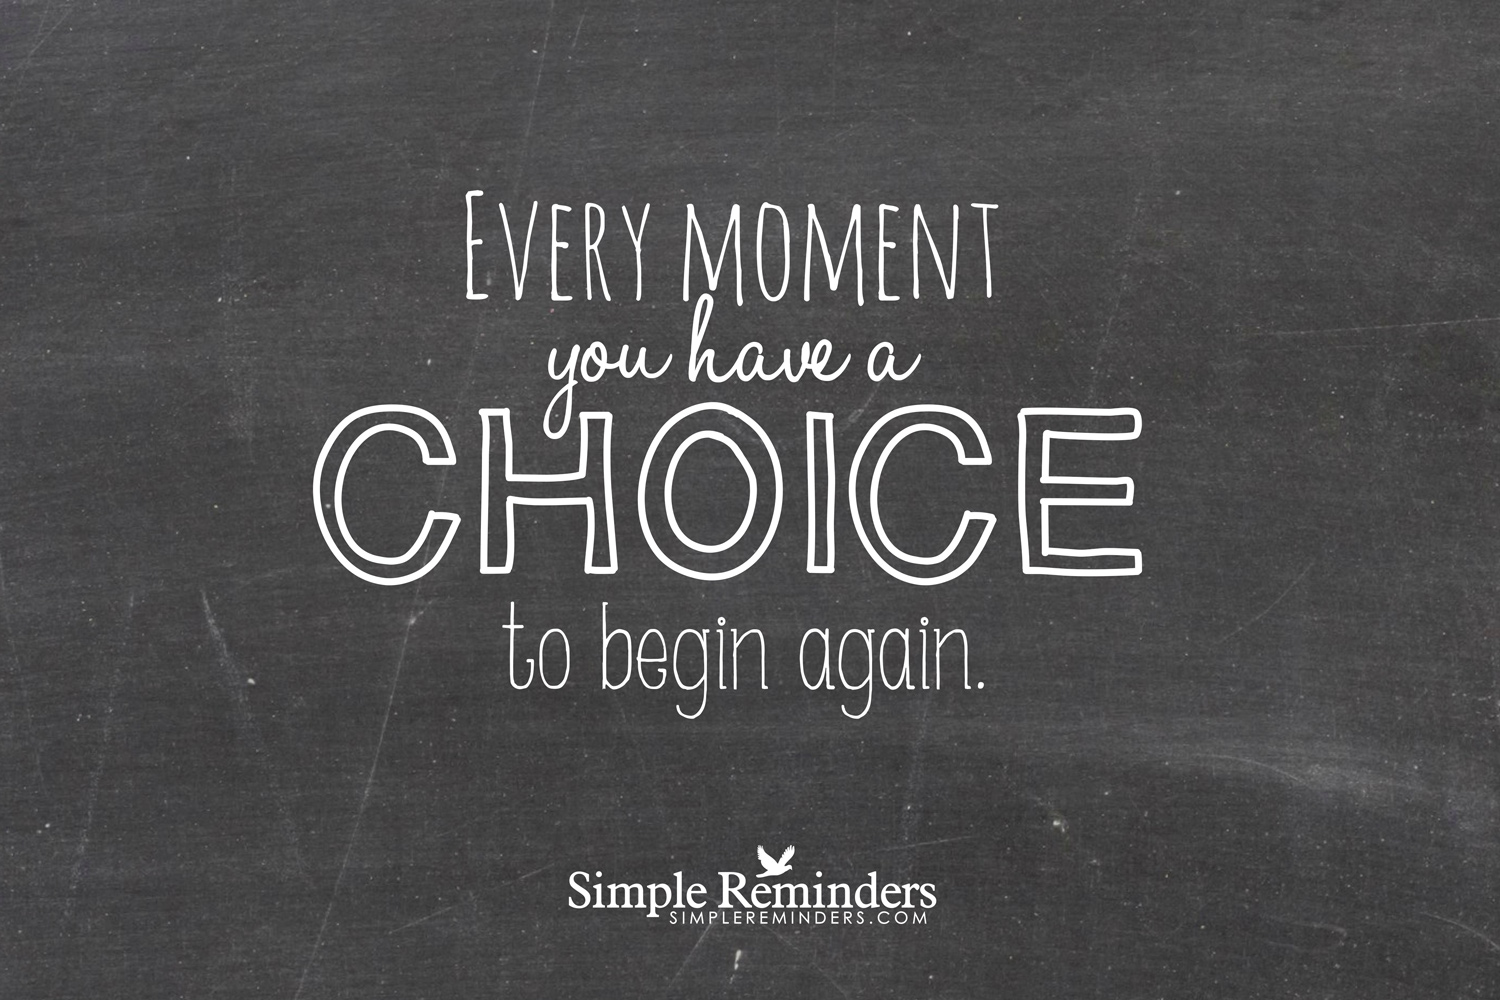 simple-reminder-every-moment-choice-unknown